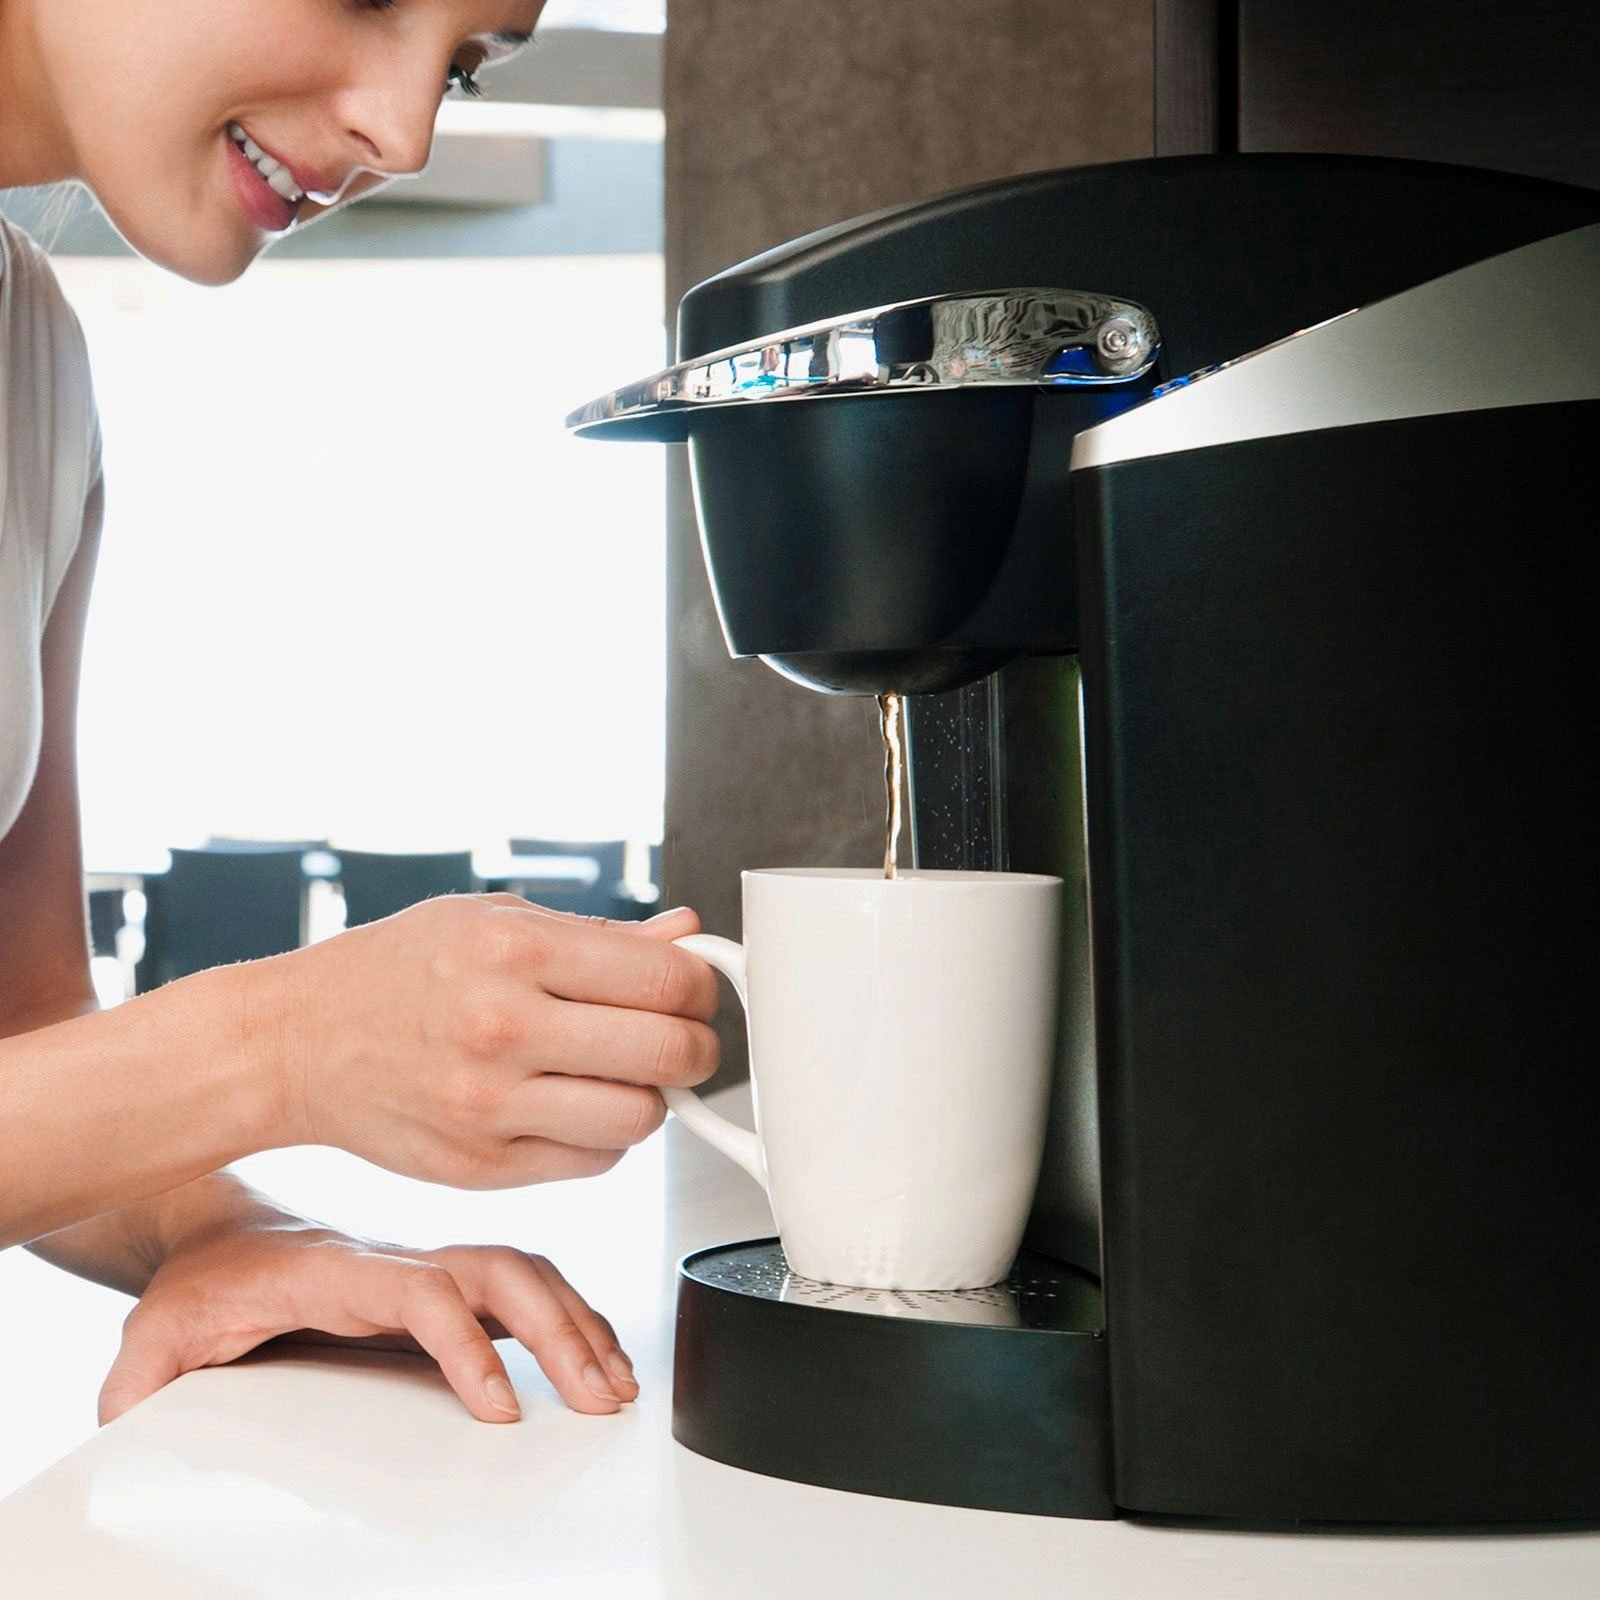 10 Tips Every Keurig Coffee Maker Owner Should Know 